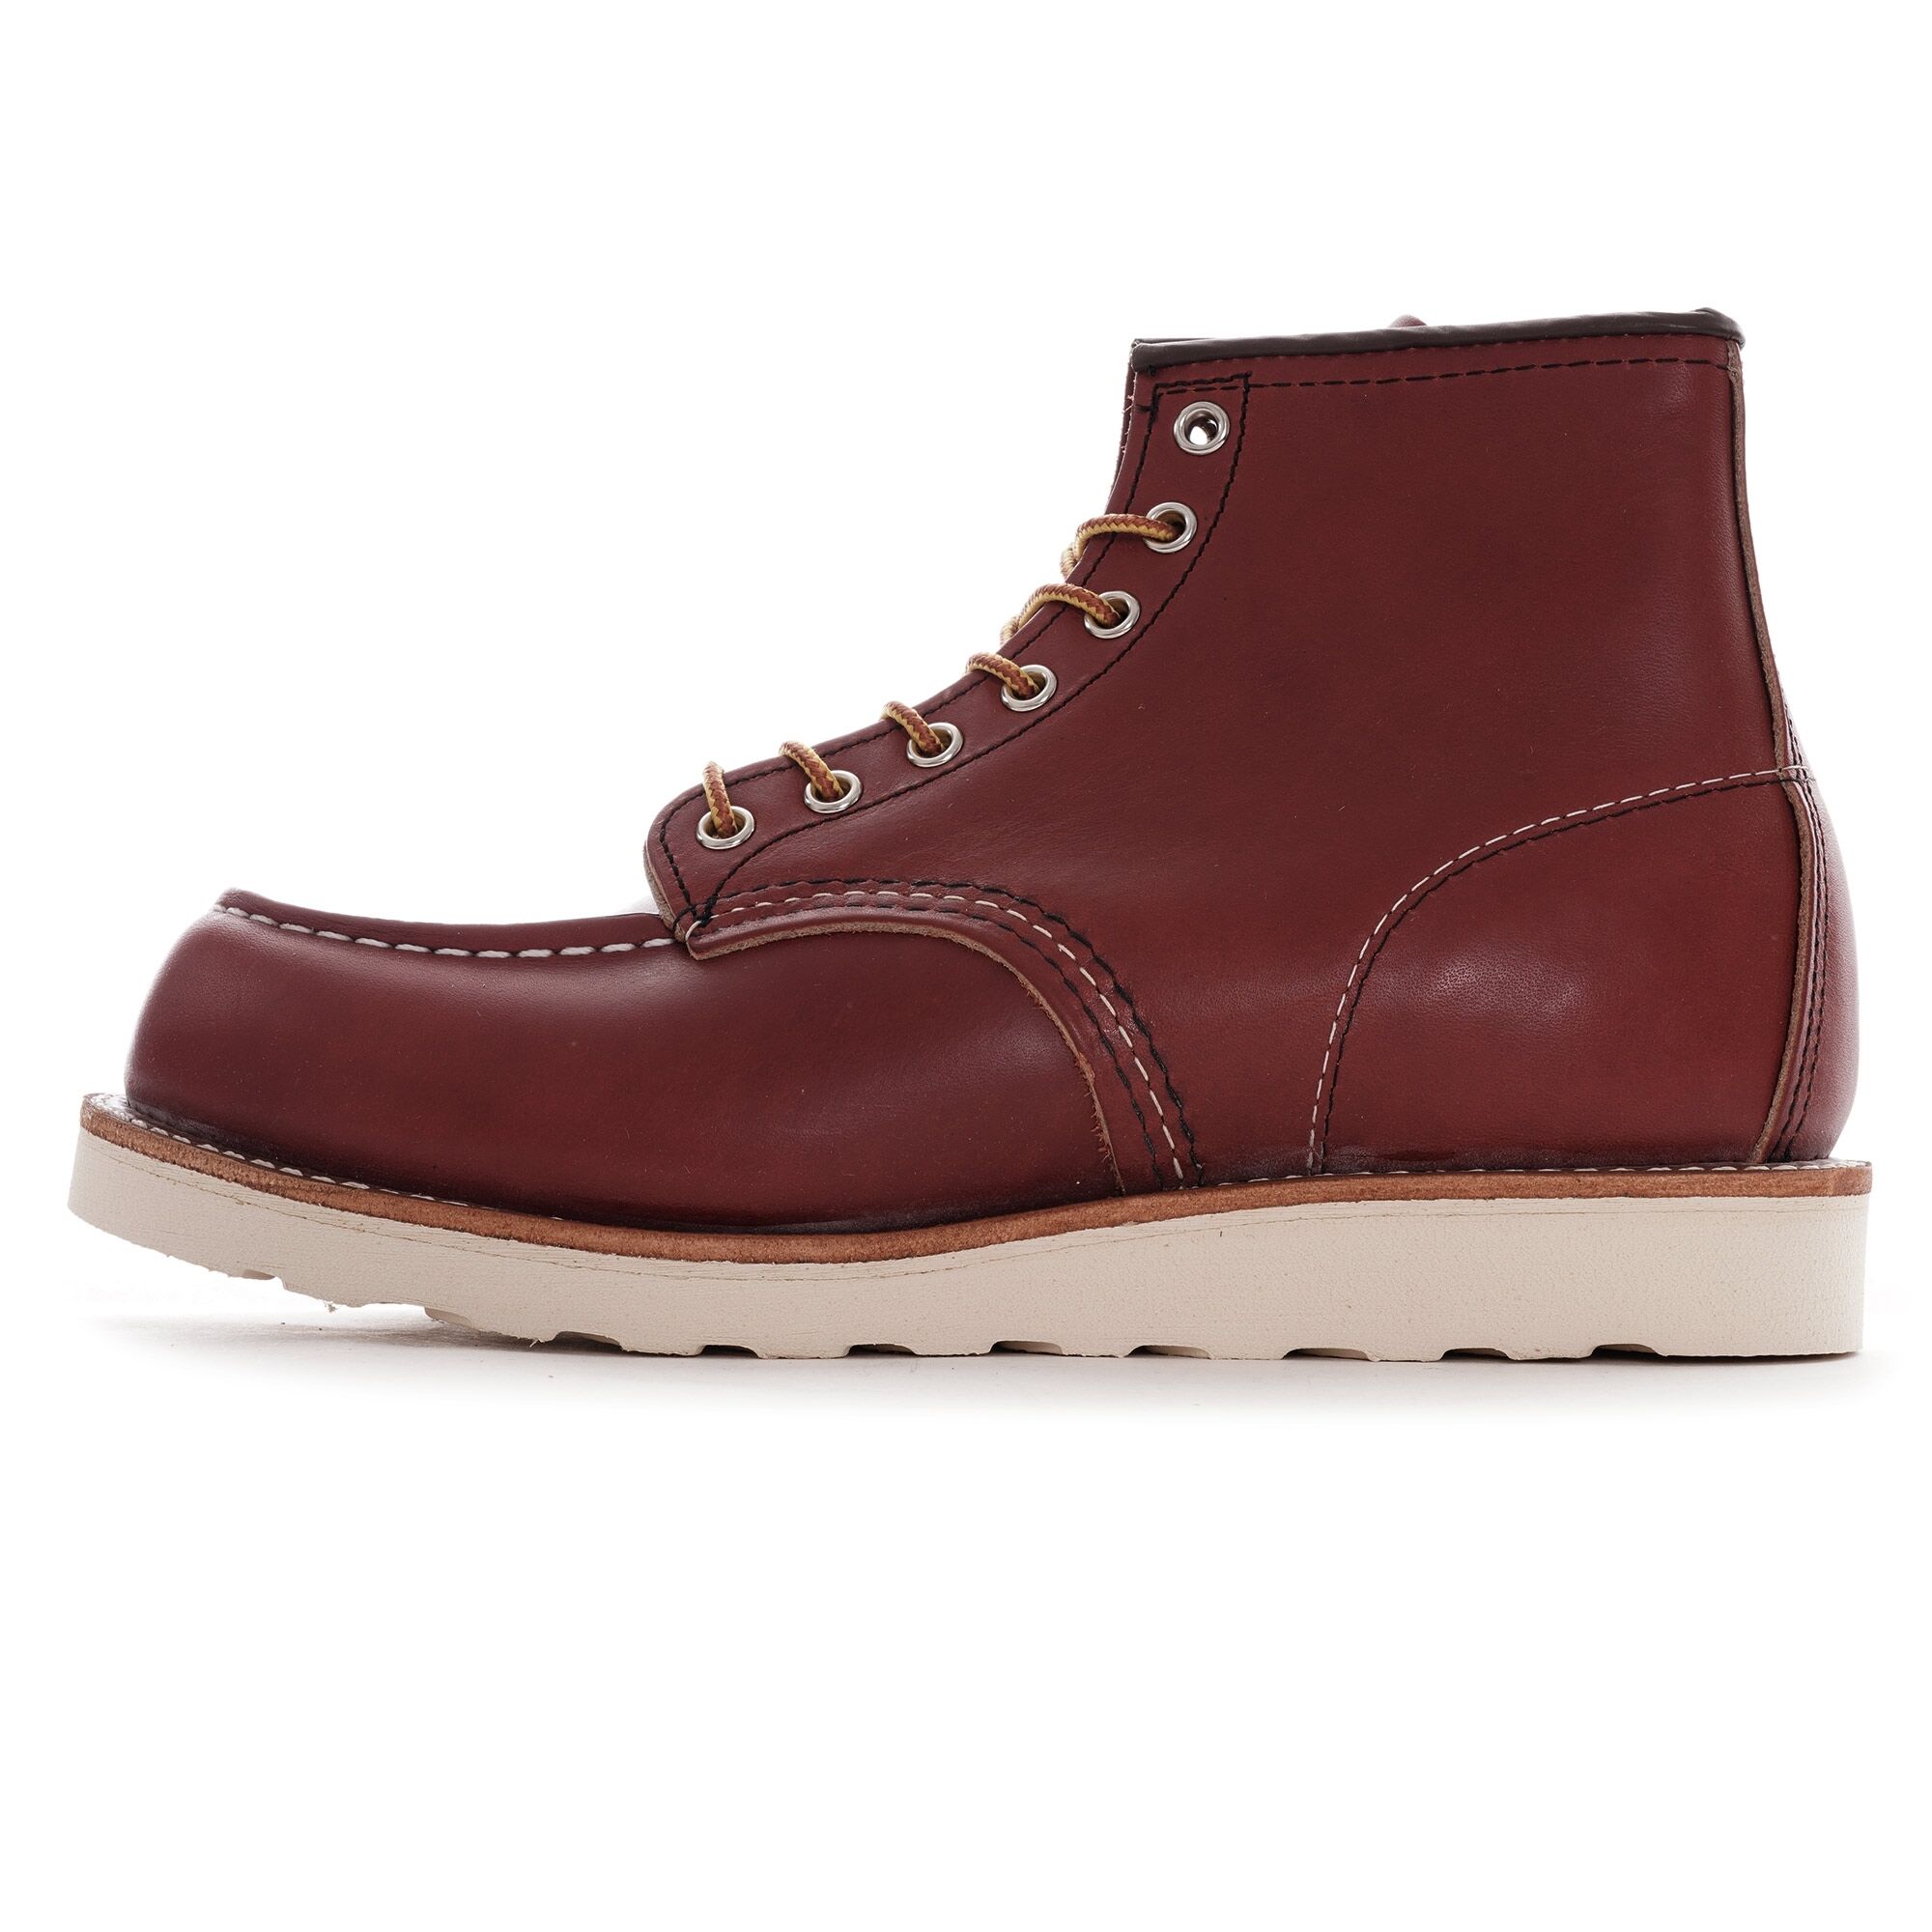 Red Wing Classic Moc Toe Boot - Briar - 8875D-BRN 6 BOOT Colour: Brown - Brown - male - Size: UK 8.5